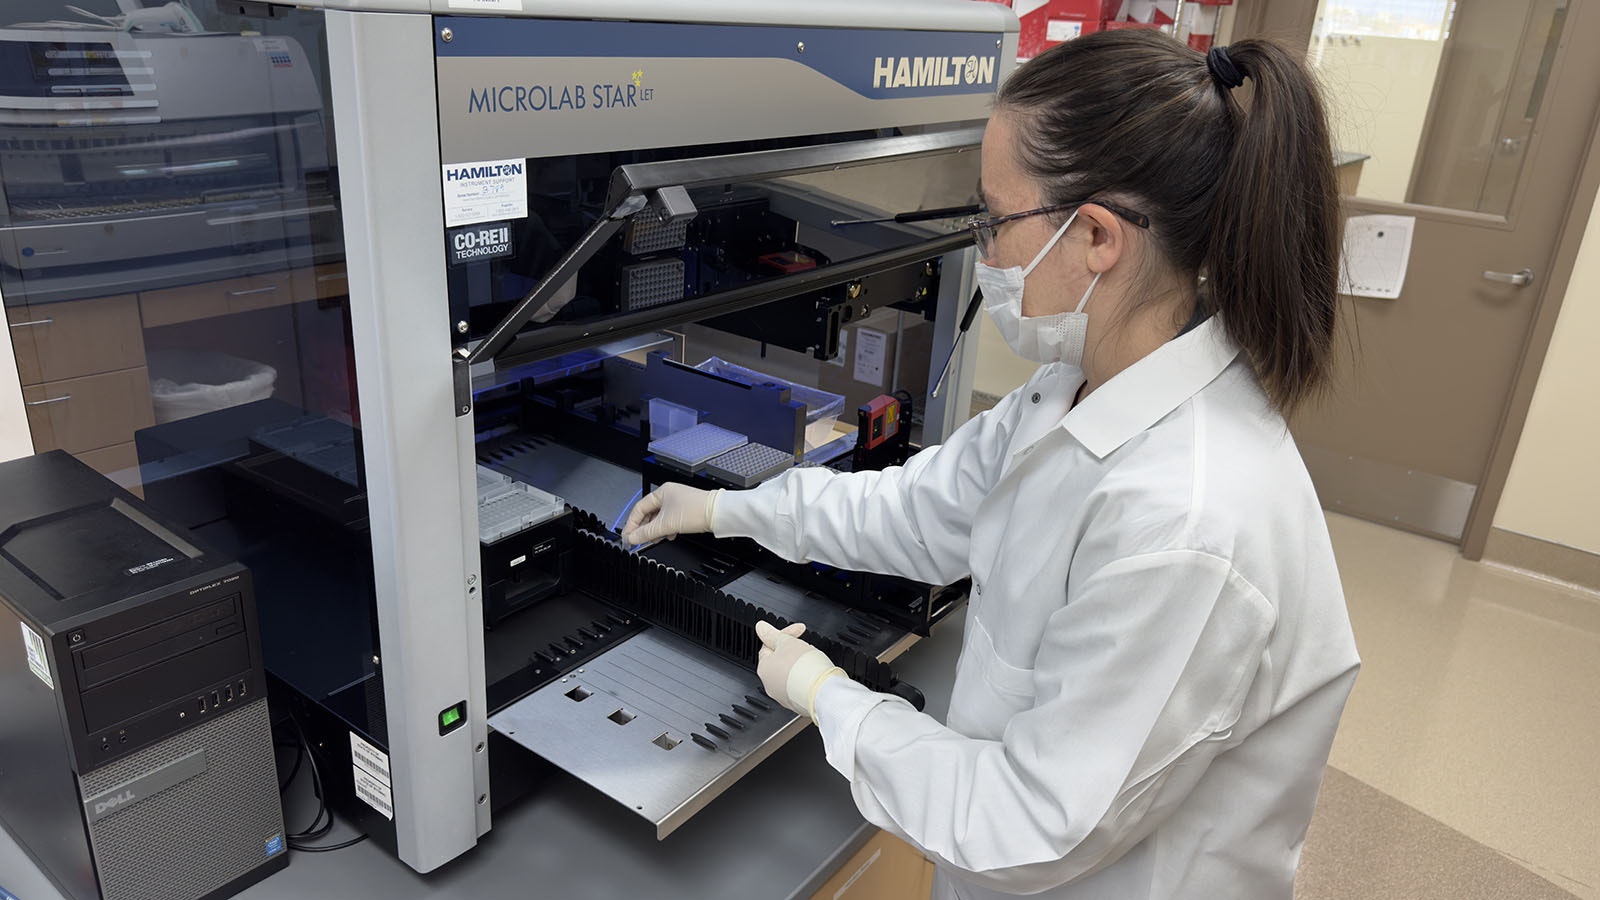 Amber Smith, a forensic analyst at the Wyoming State Crime Lab in Cheyenne, demonstrates how this Hamilton aparatus works. It can process nearly 90 individual DNA samples at a time.